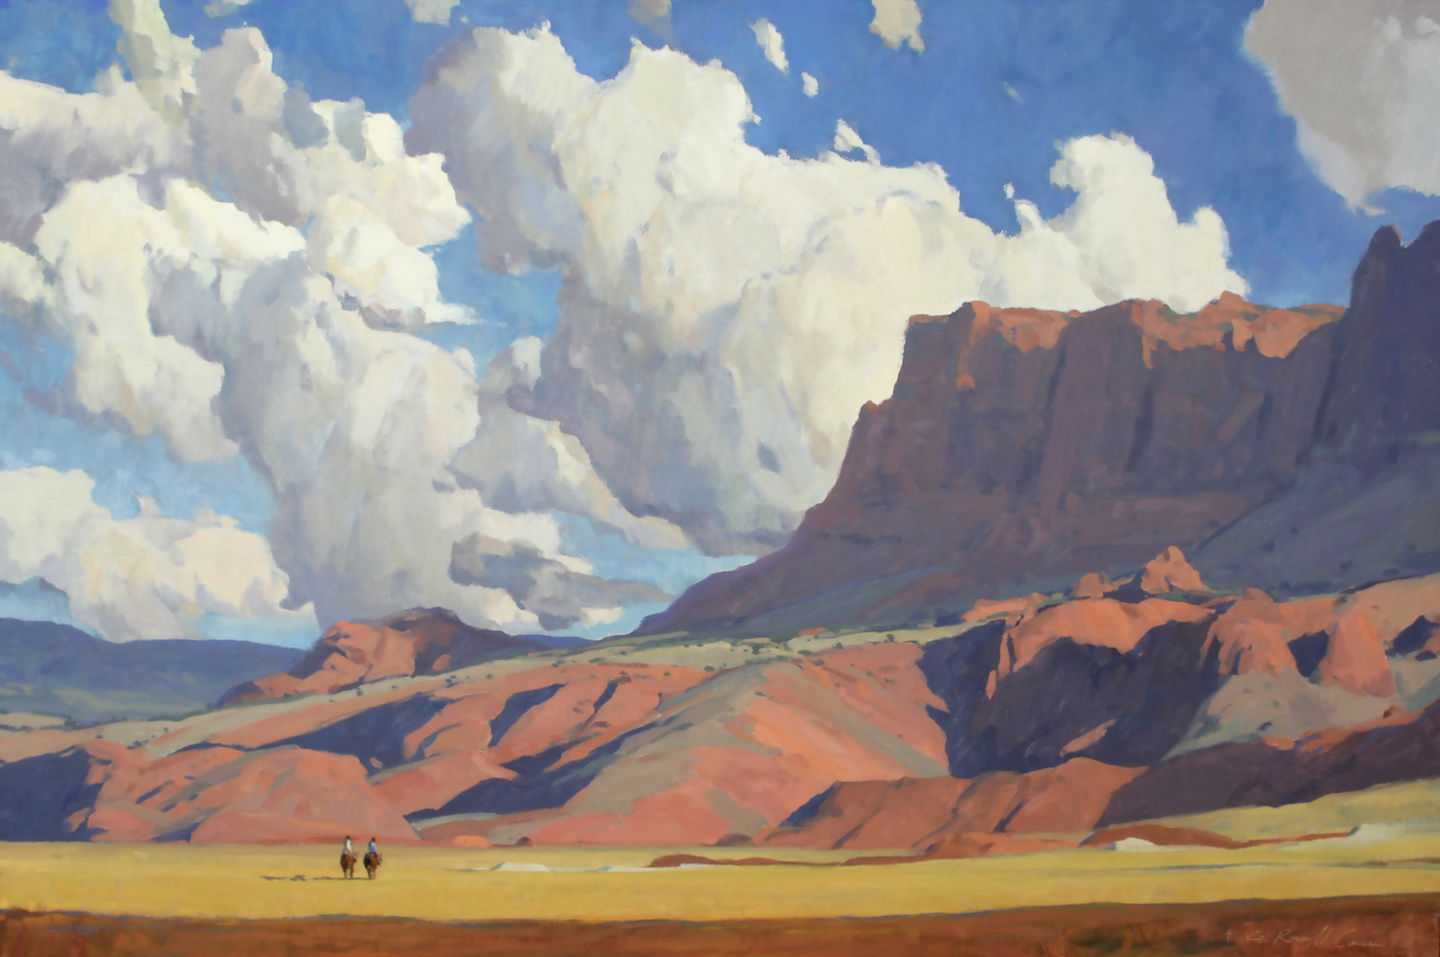 Dancing Skies by G. Russell Case 24 x 36